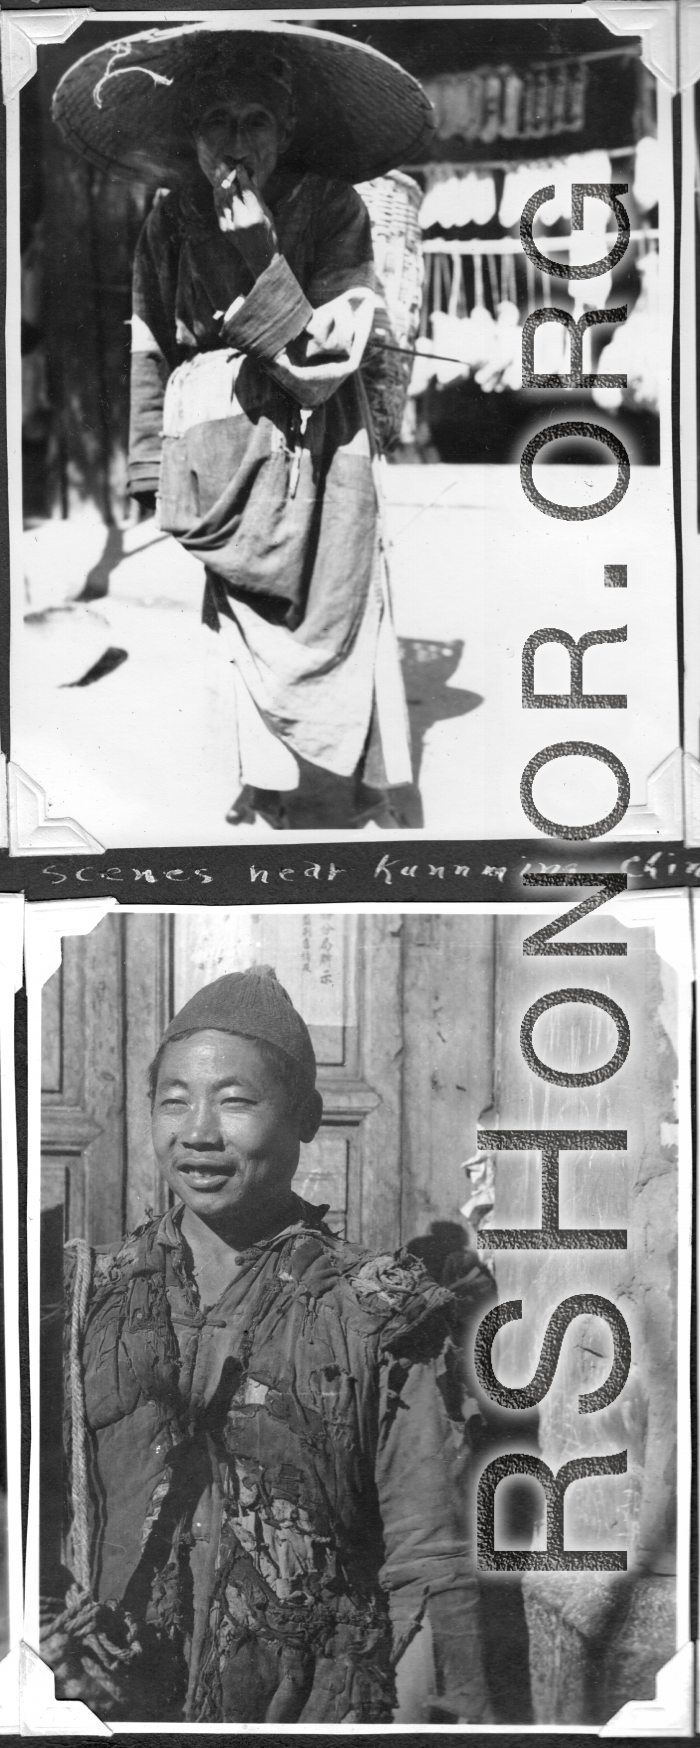 Scenes in Kunming, China, area during WWII: Old man smoking, poor young man.